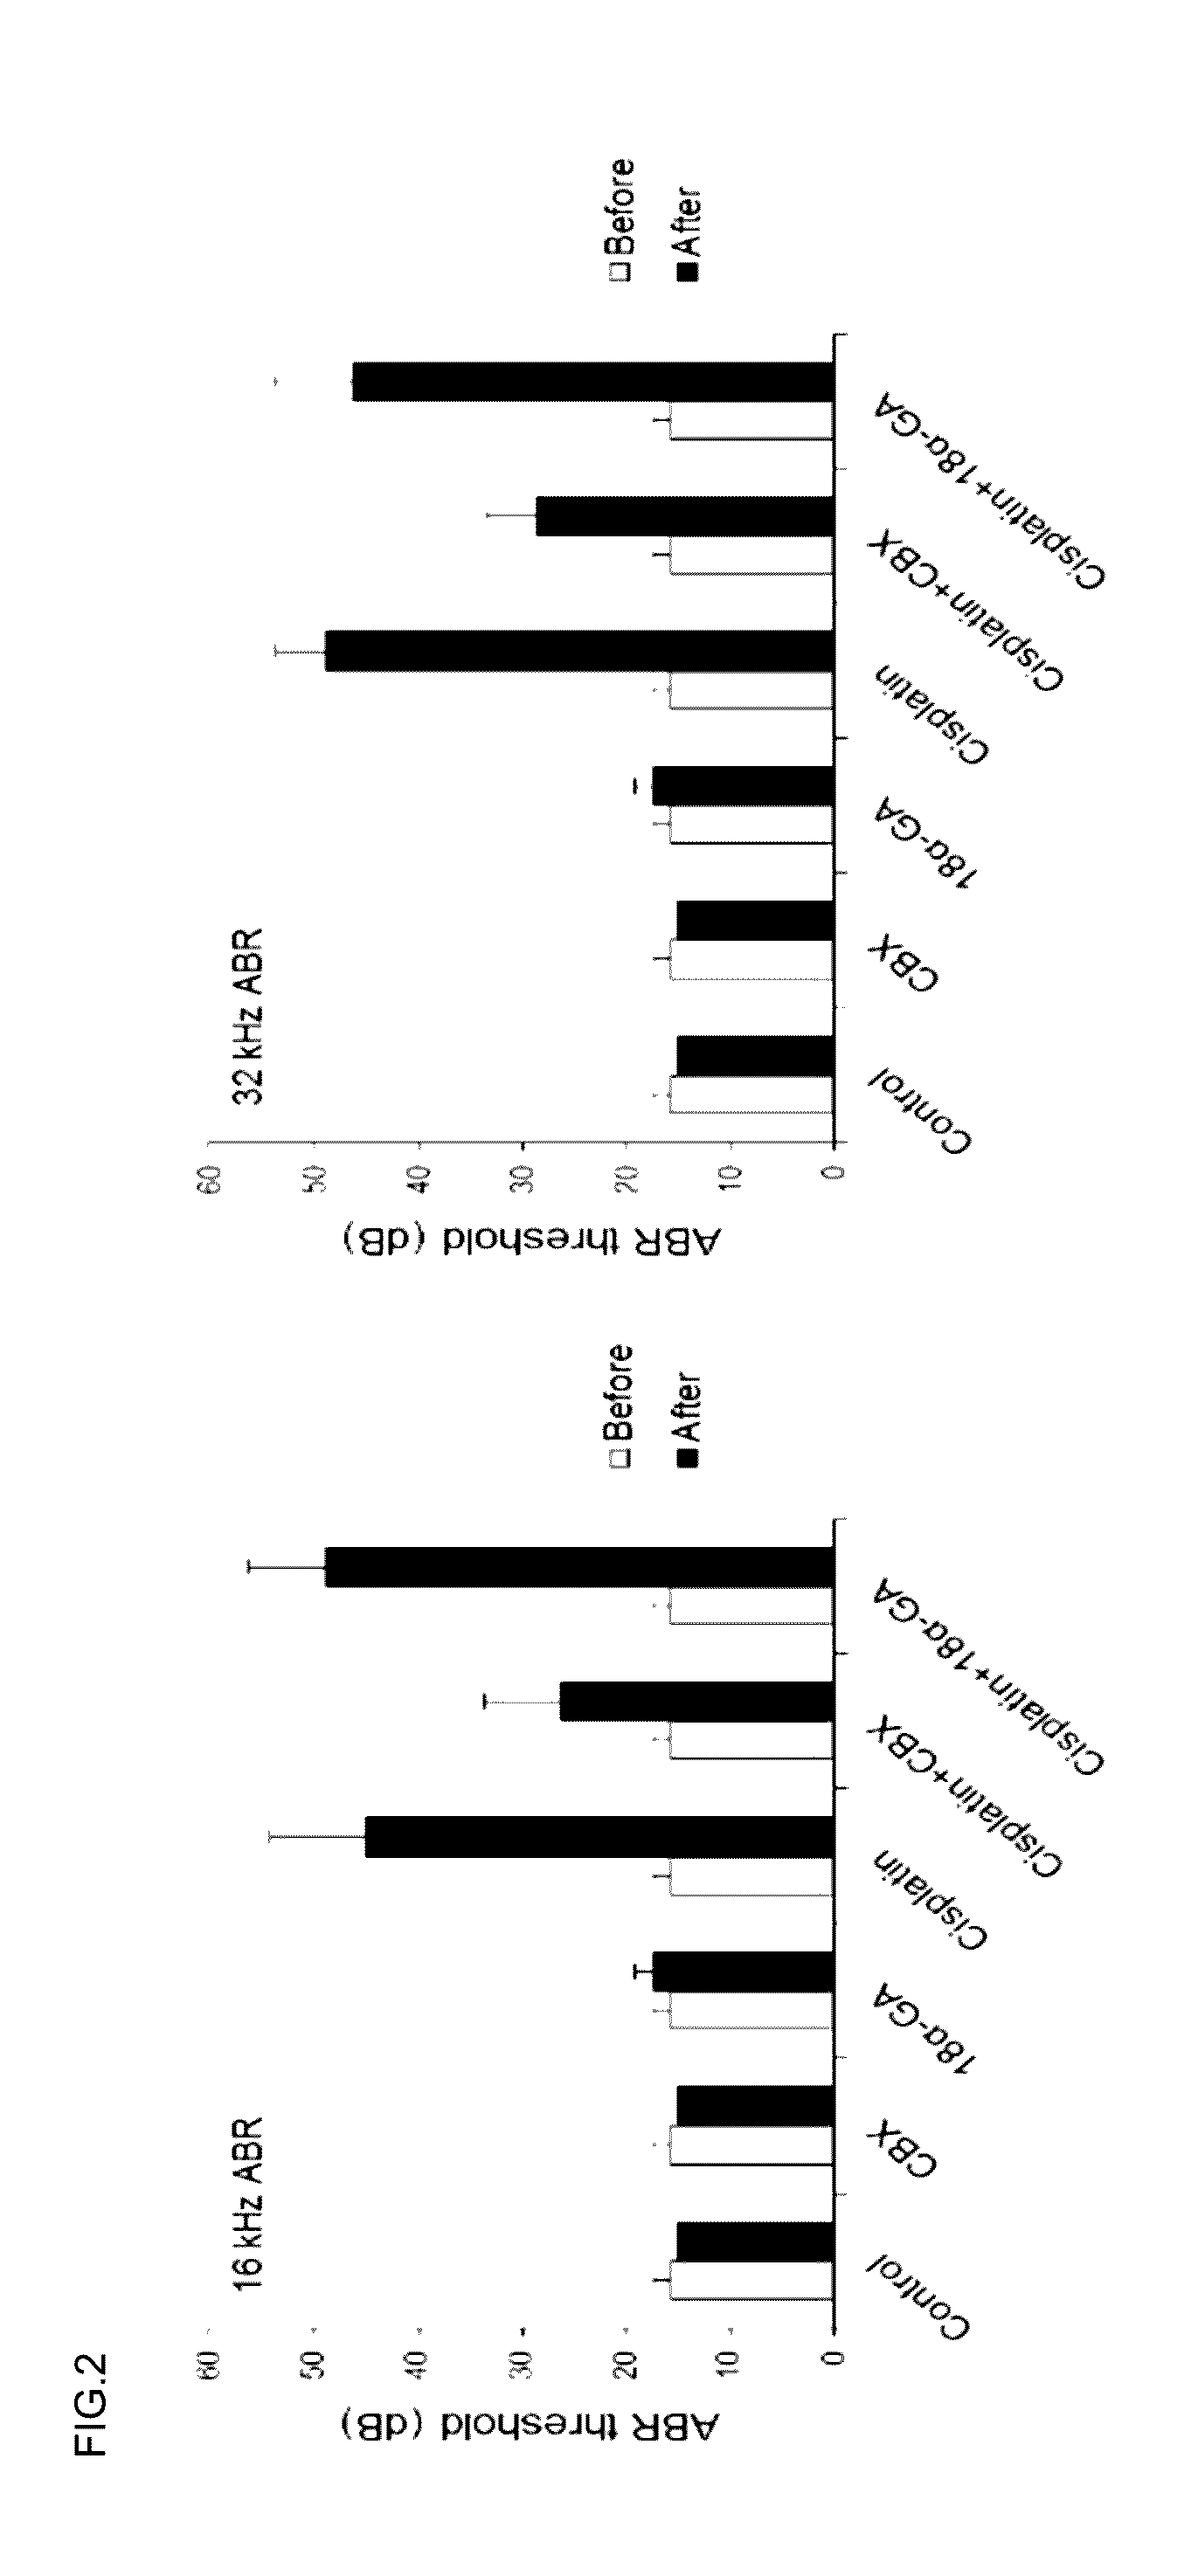 Pharmaceutical composition for preventing or treatinghearing loss, comprising carbenoxolone or its pharmaceutically acceptable salts as effective compound